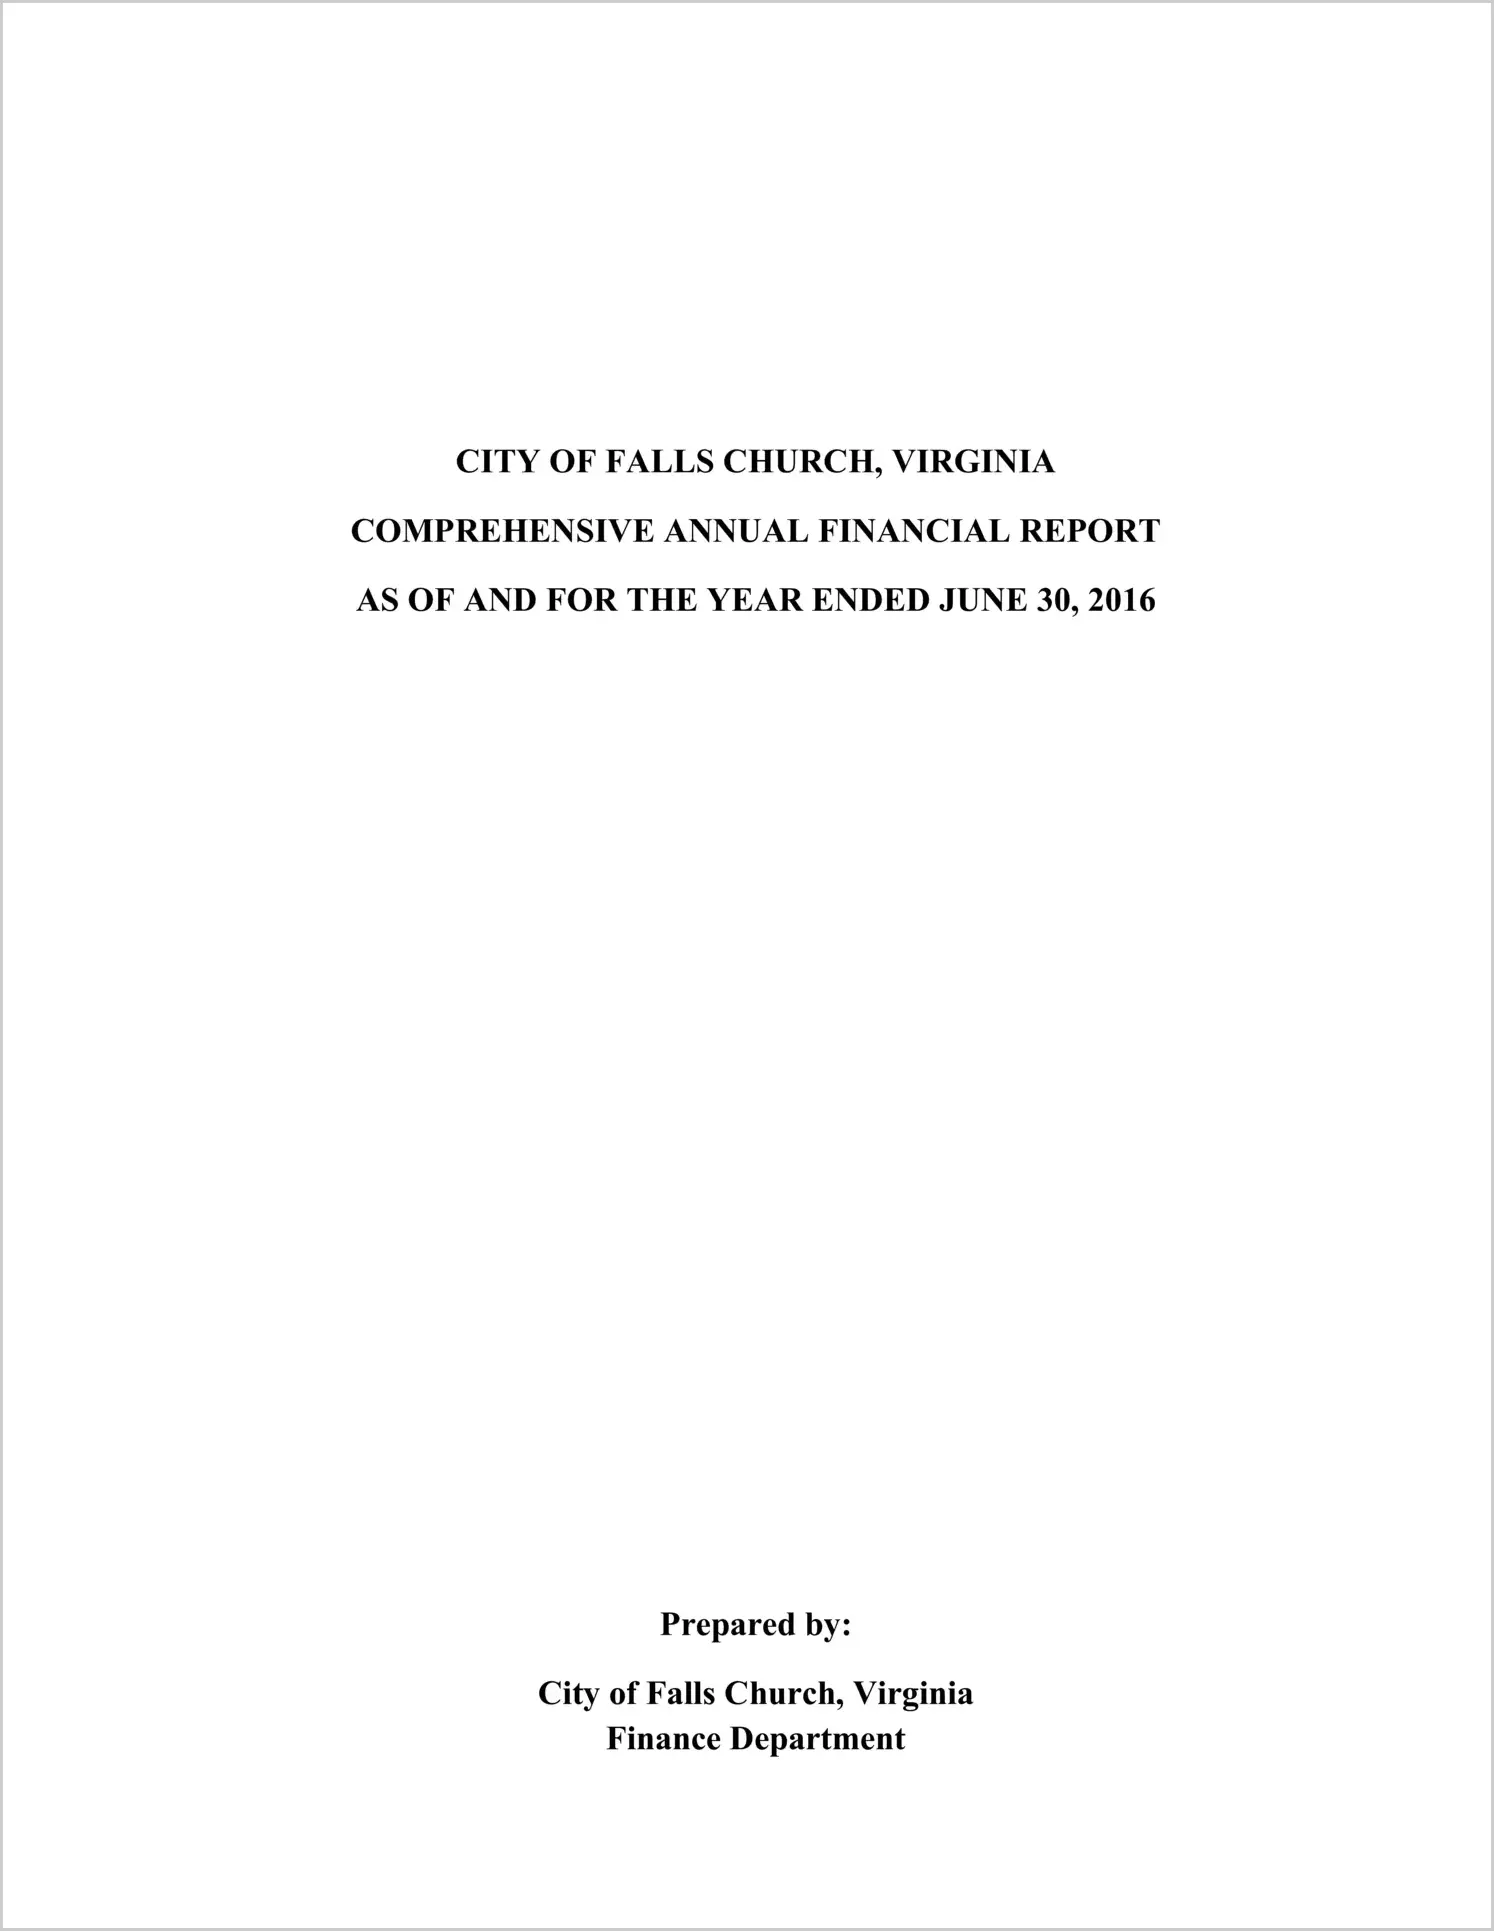 2016 Annual Financial Report for City of Falls Church